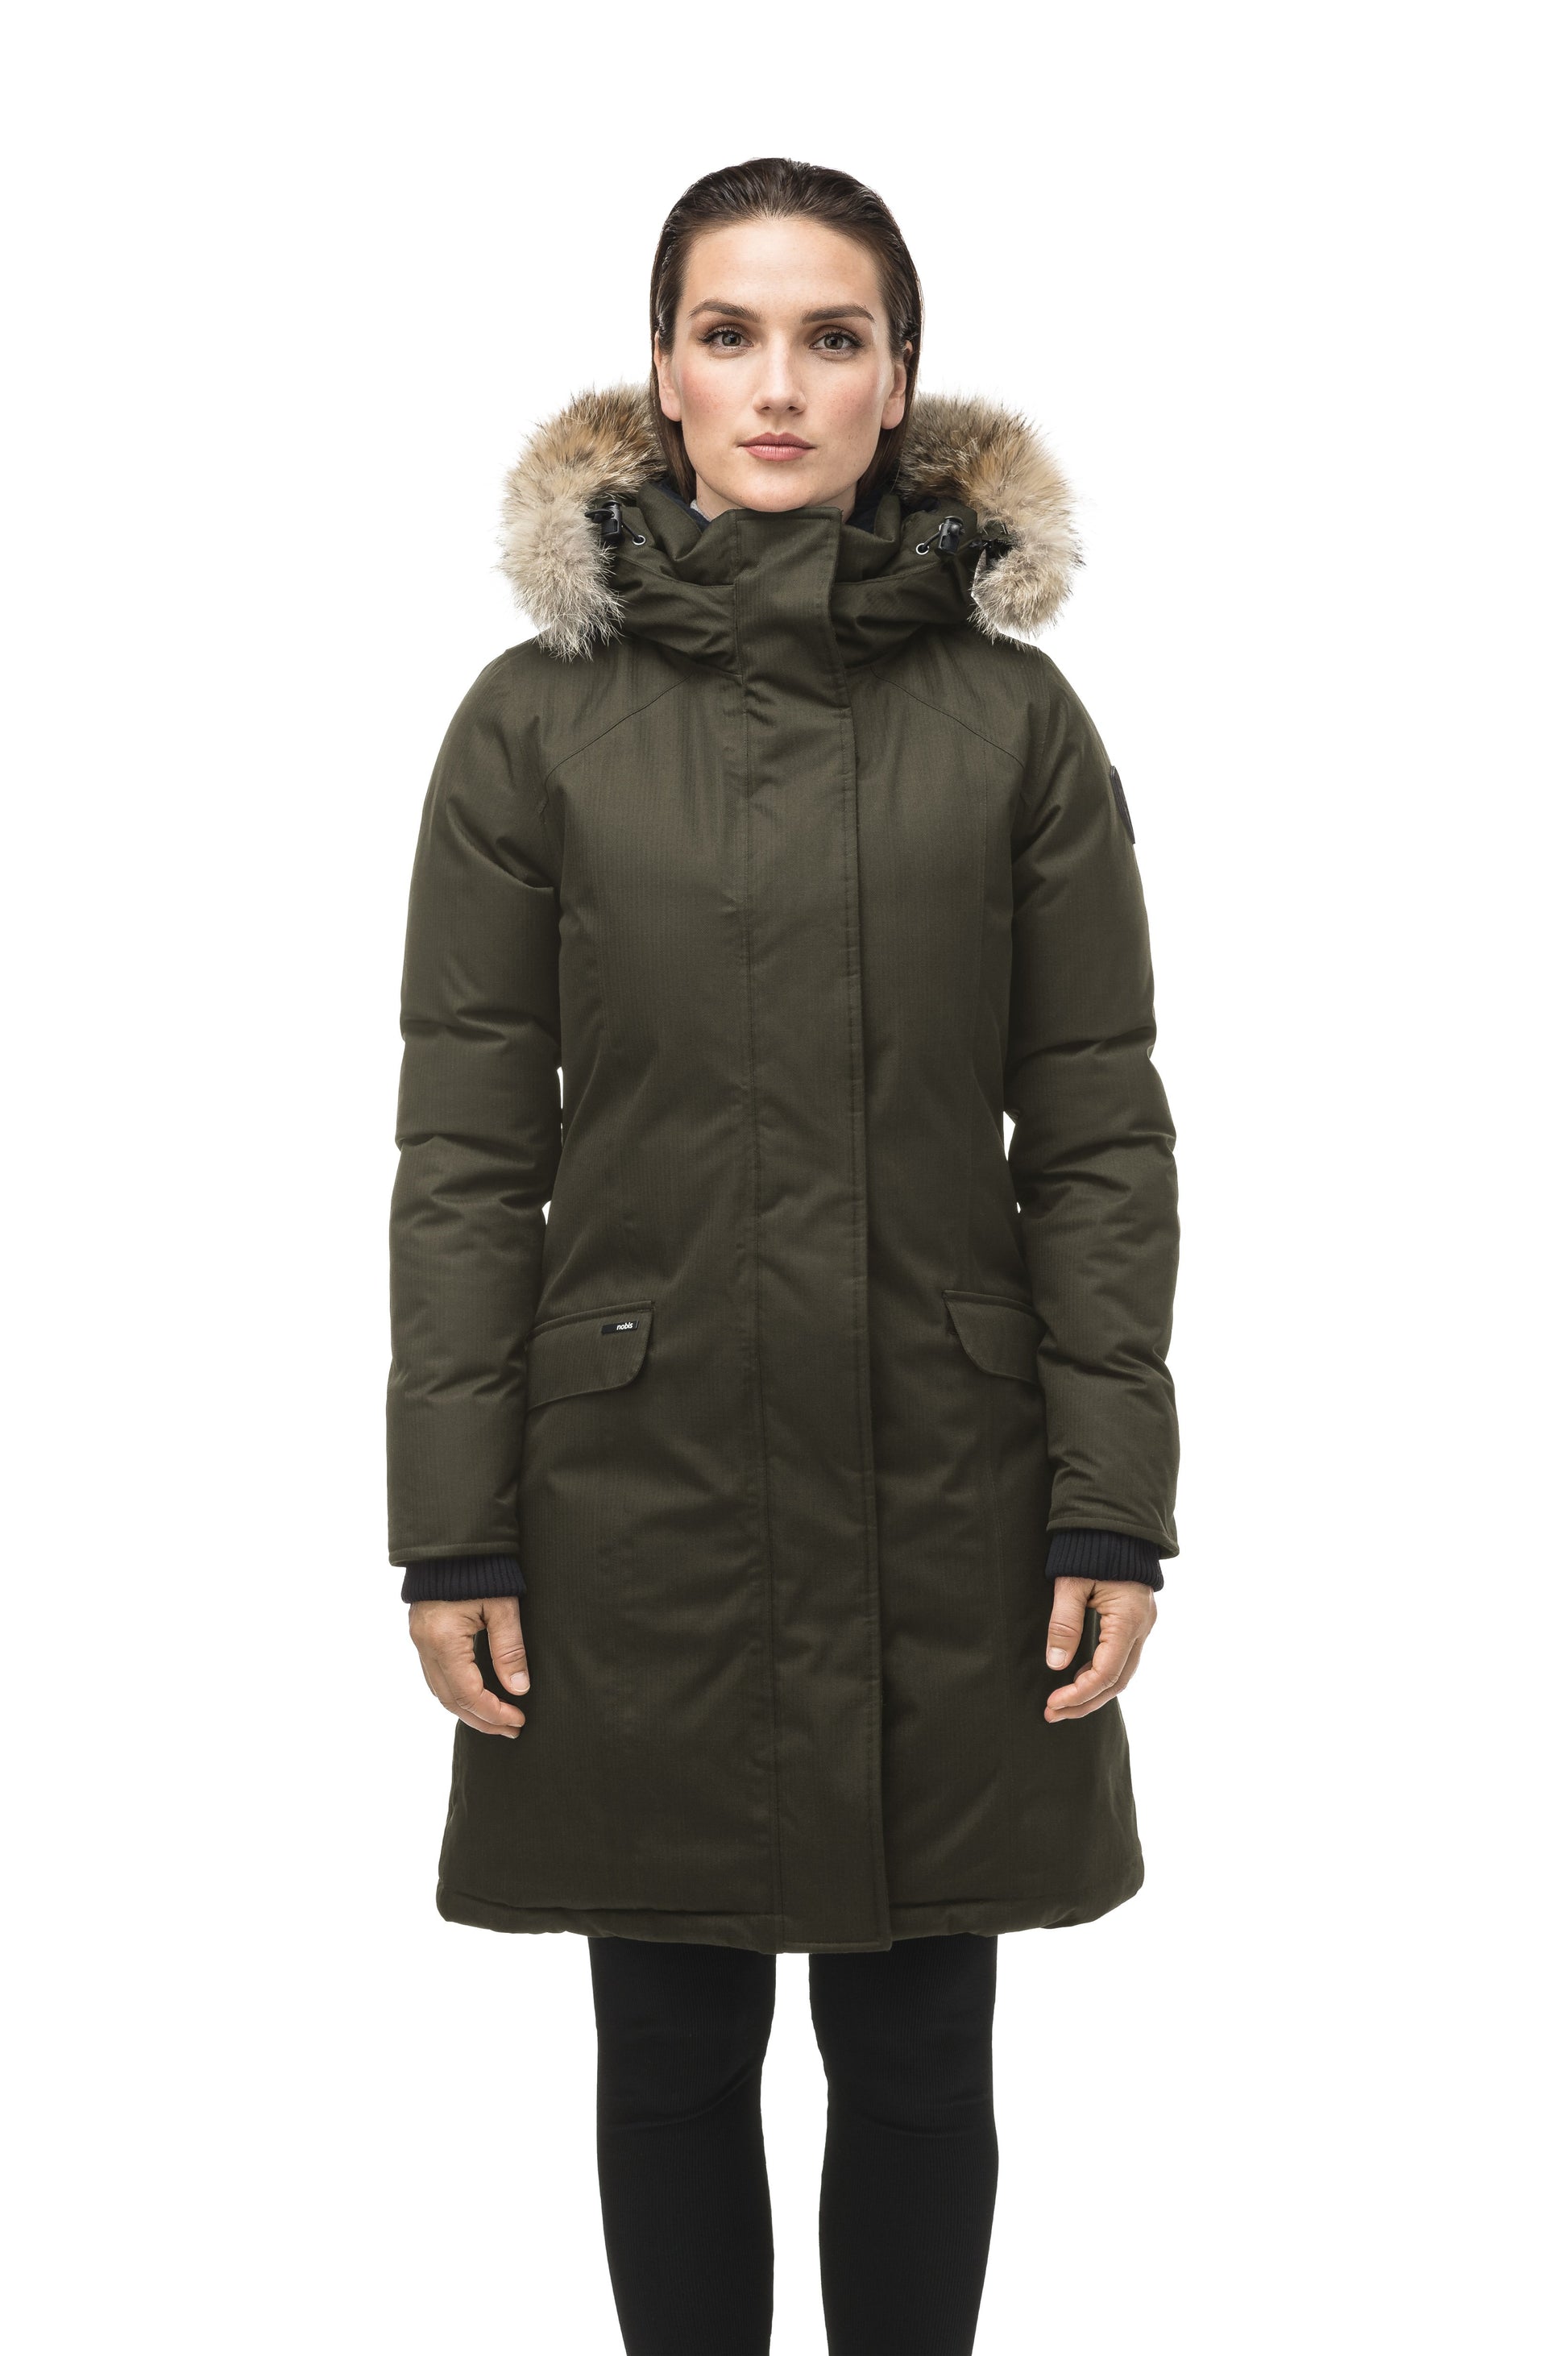 Rebecca Women's Parka in knee length, Canadian duck down insulation, two-way zipper with magnetic front placket, non-removable hood with removable coyote fur trim, in Fatigue